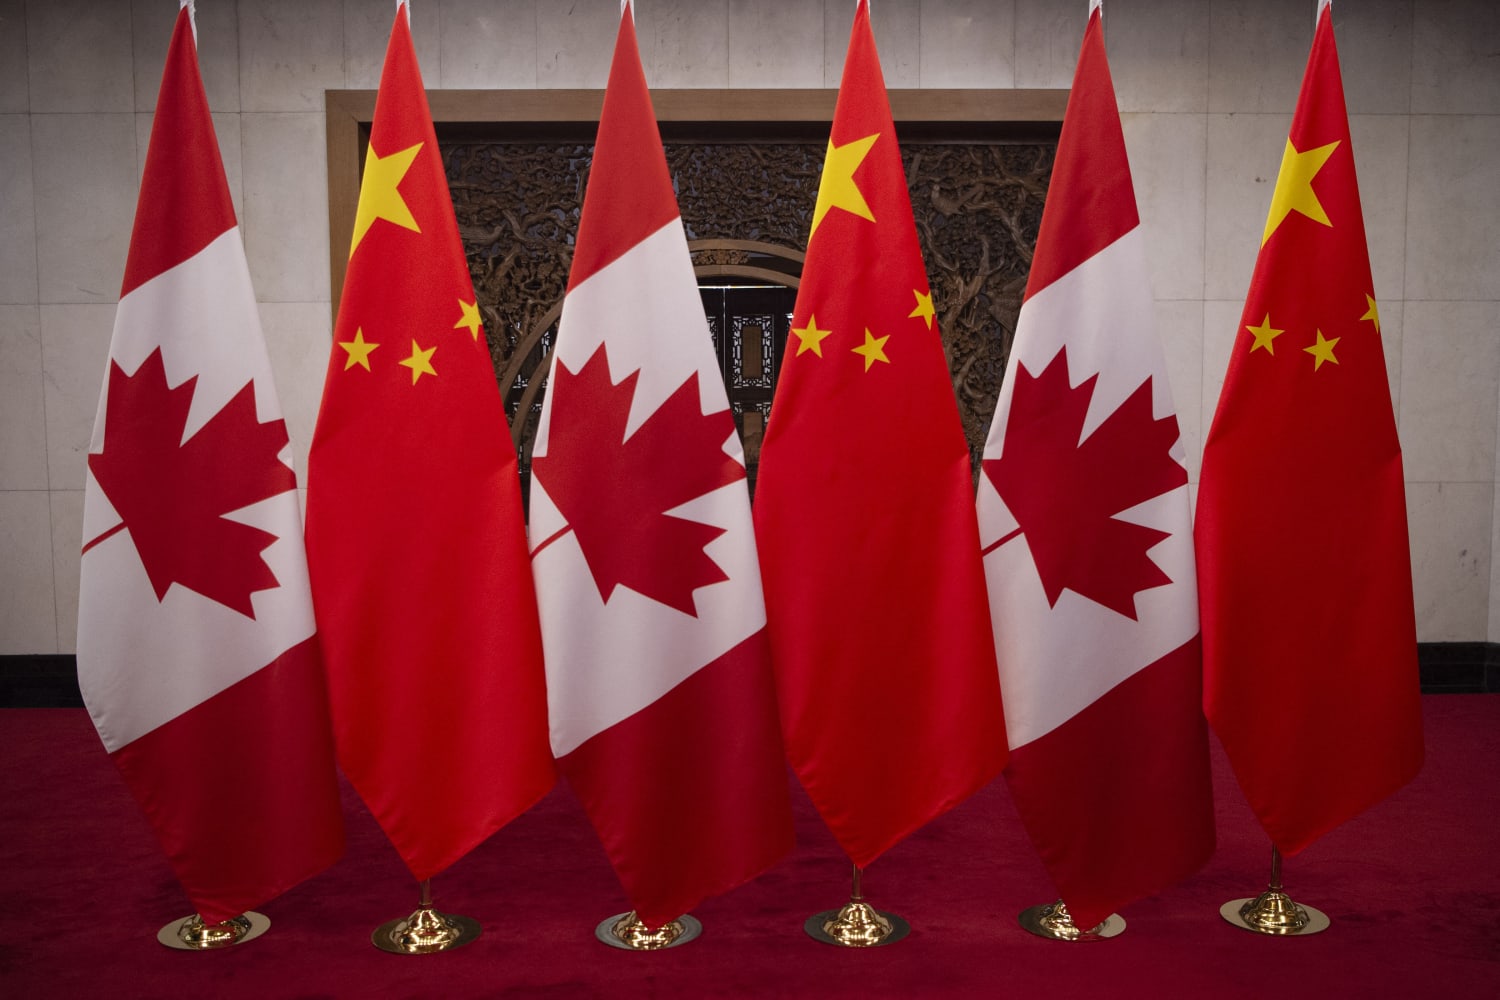 Canadian lawmaker quits Trudeau’s party amid China allegations